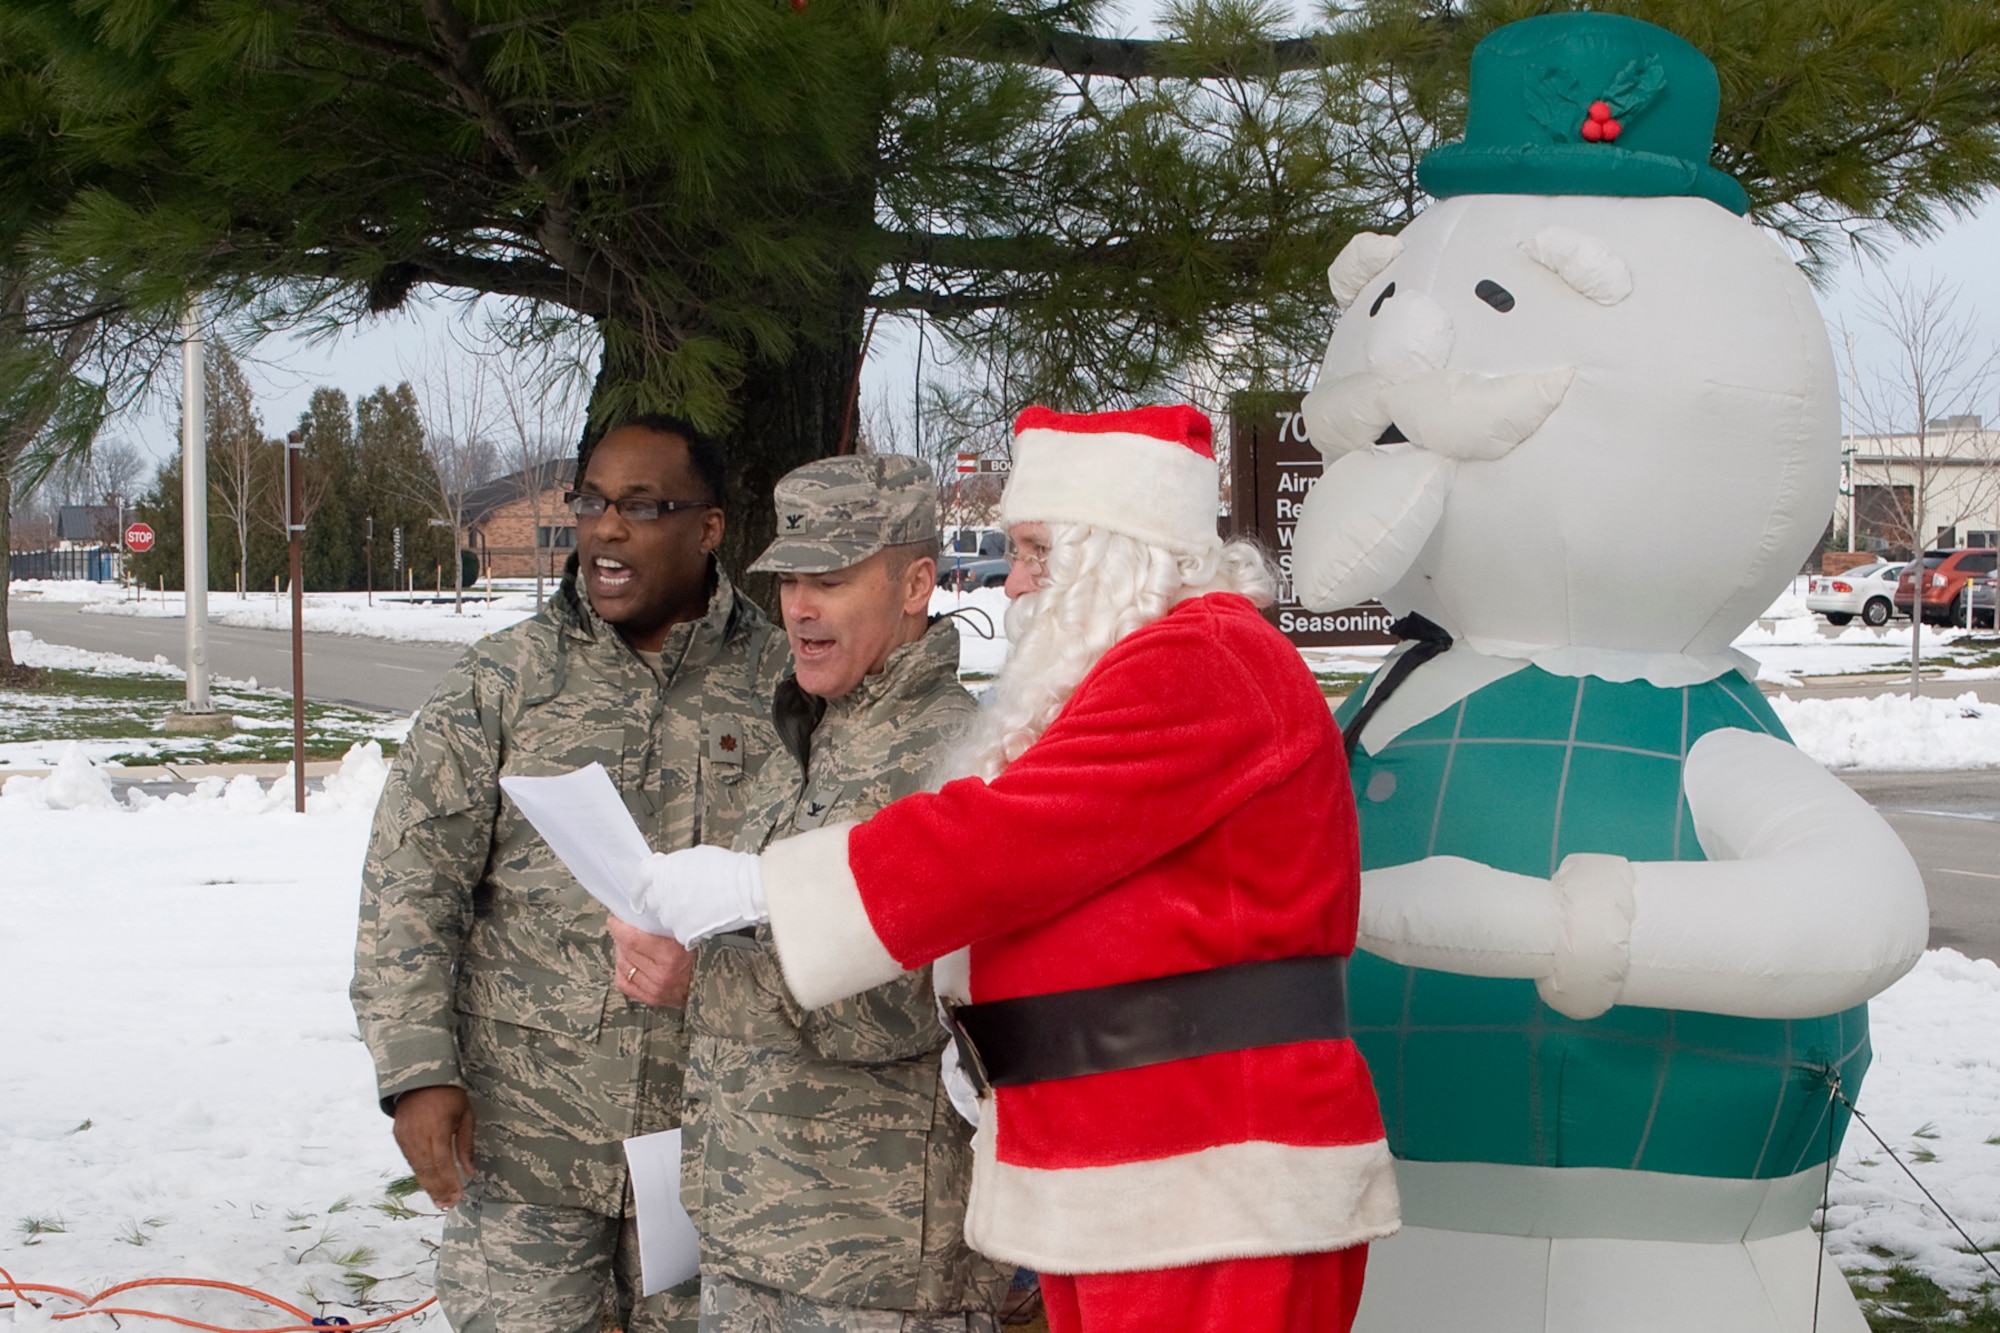 GRISSOM AIR RESERVE BASE, Ind. -- From left to right, Chaplain (Maj.) Obadiah Smith, Col. William T. "Tim" Cahoon and Santa Claus sing Oh Christmas Tree under  outside the Airman and Family Readiness building under a white pine tree, which was lit up for the holidays during the December unit training assembly. Cahoon is the 434th Air Refueling Wing Commander and Smith is the 434th ARW chaplain. (U.S. Air Force photo/Senior Airman Andrew McLaughlin)
